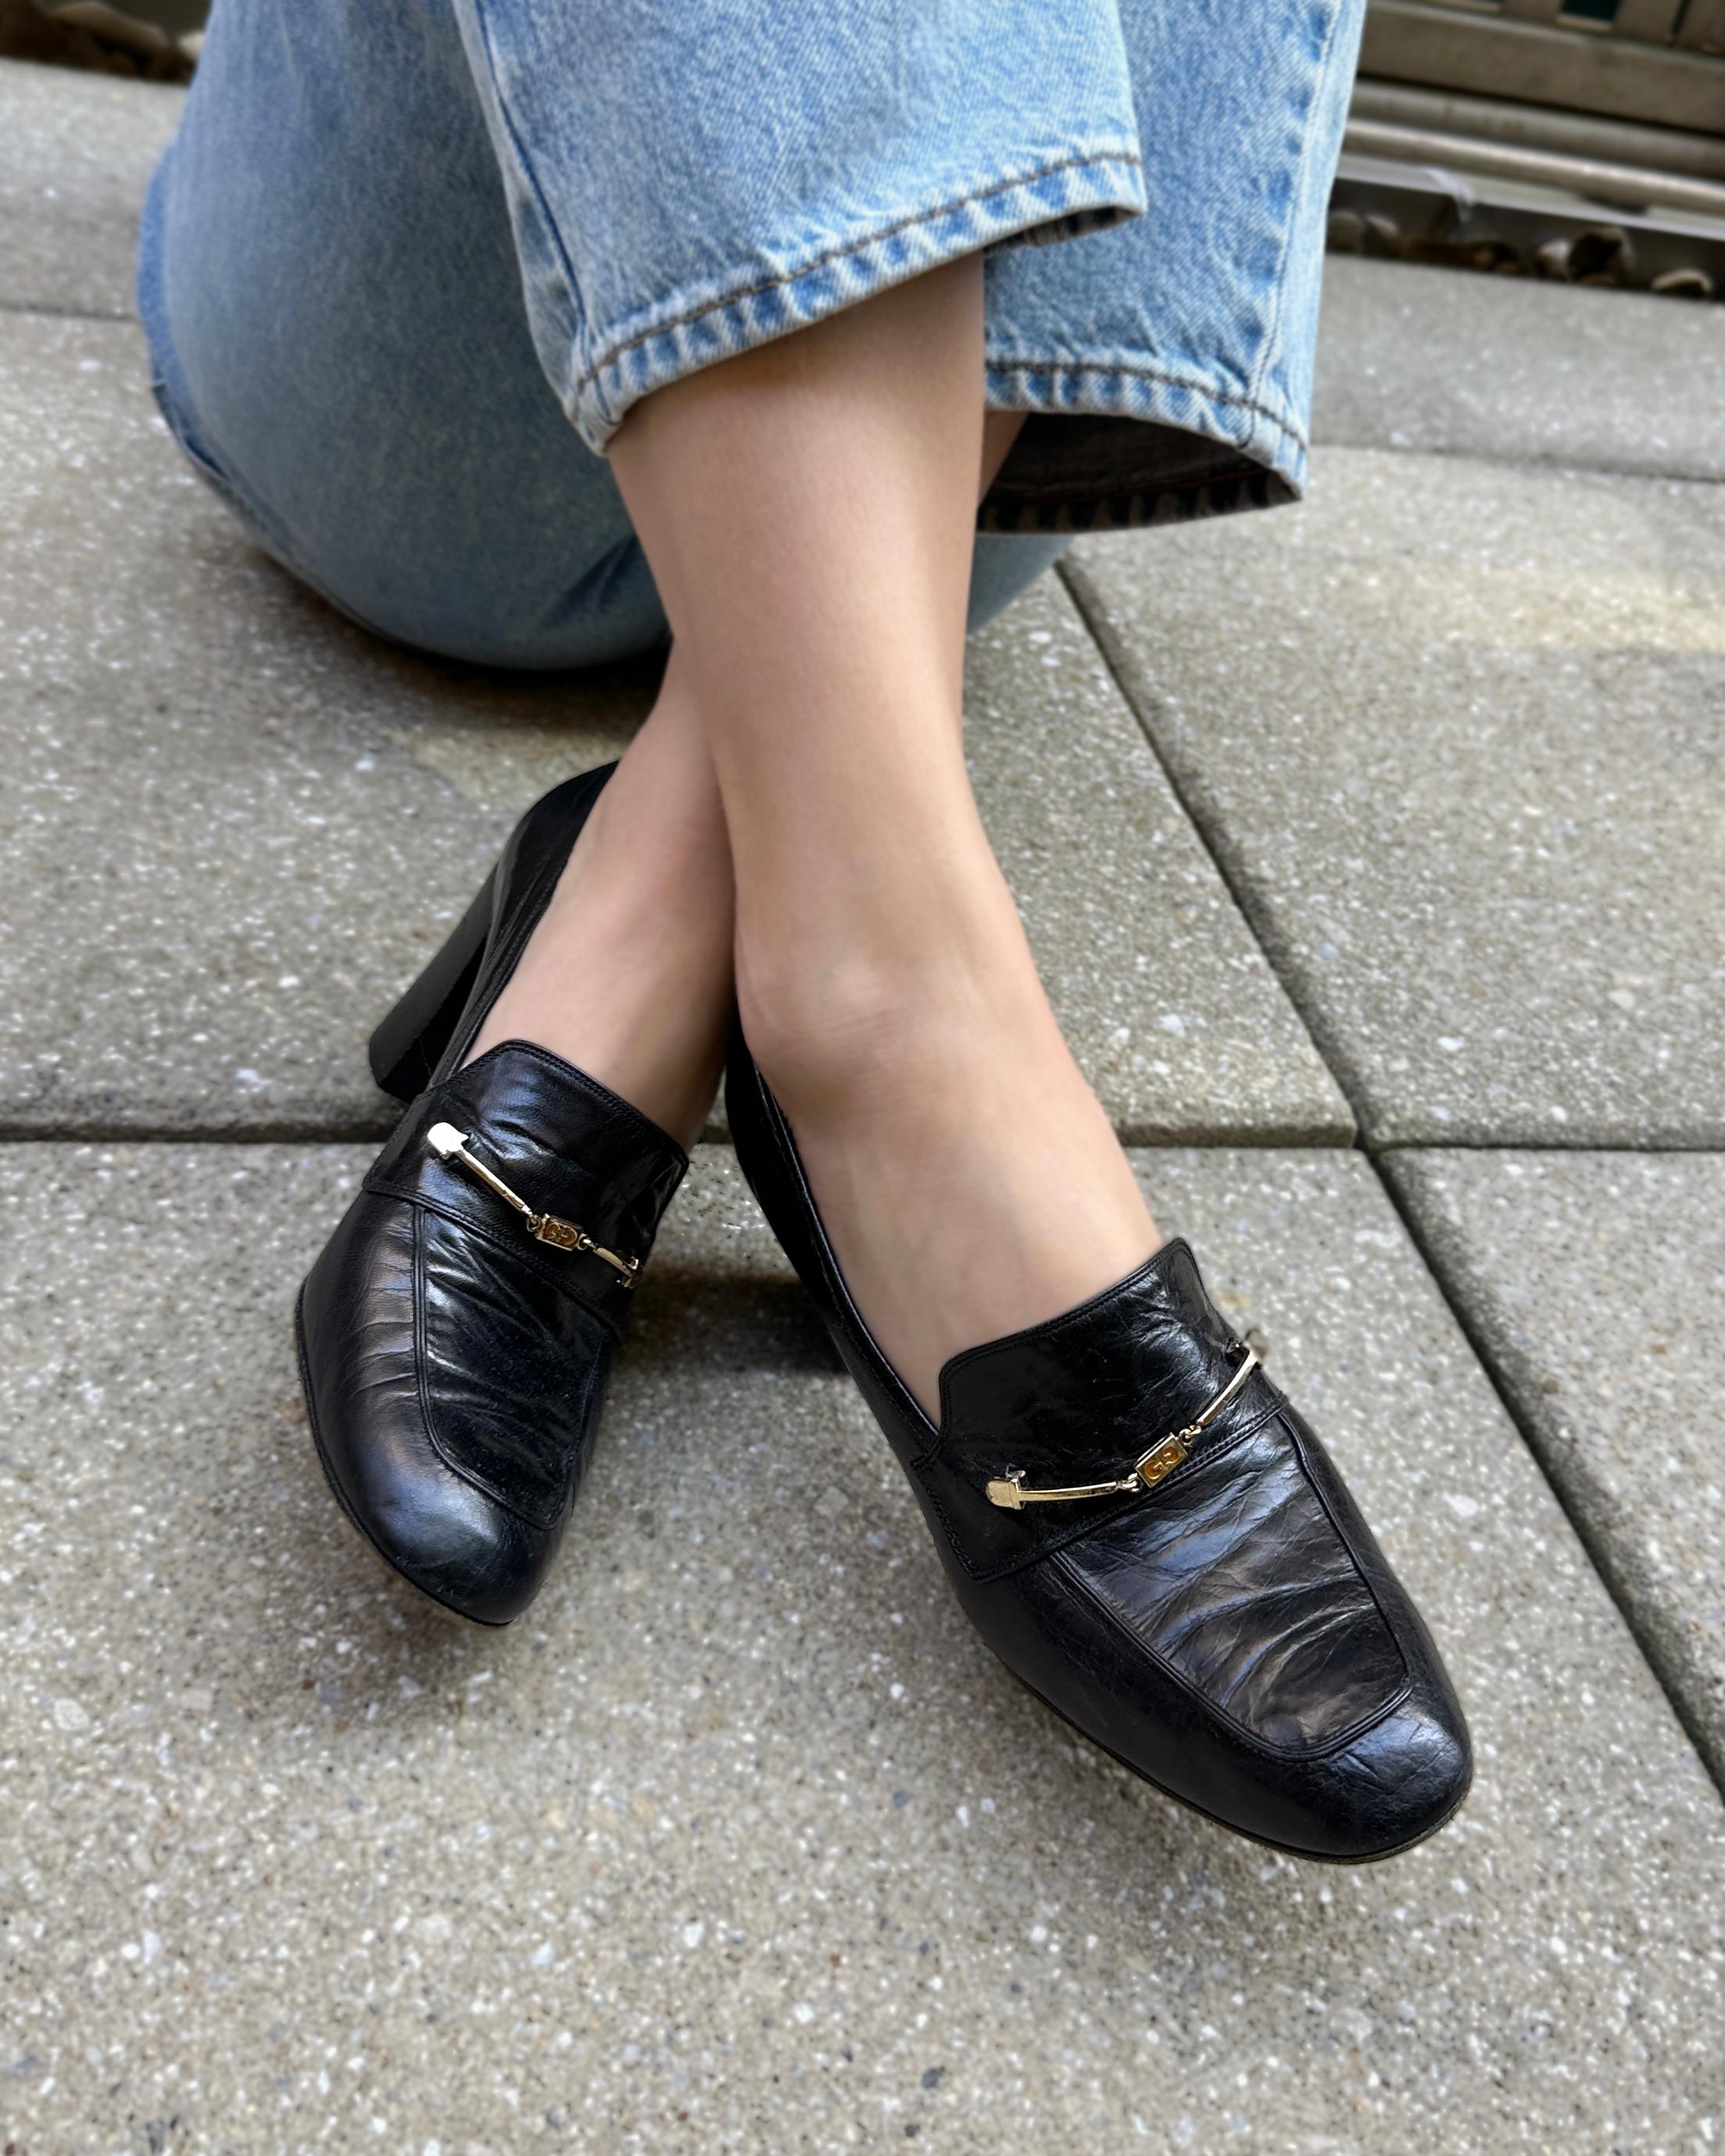 Women's VINTAGE 1970s GUCCI HEELED LOAFERS